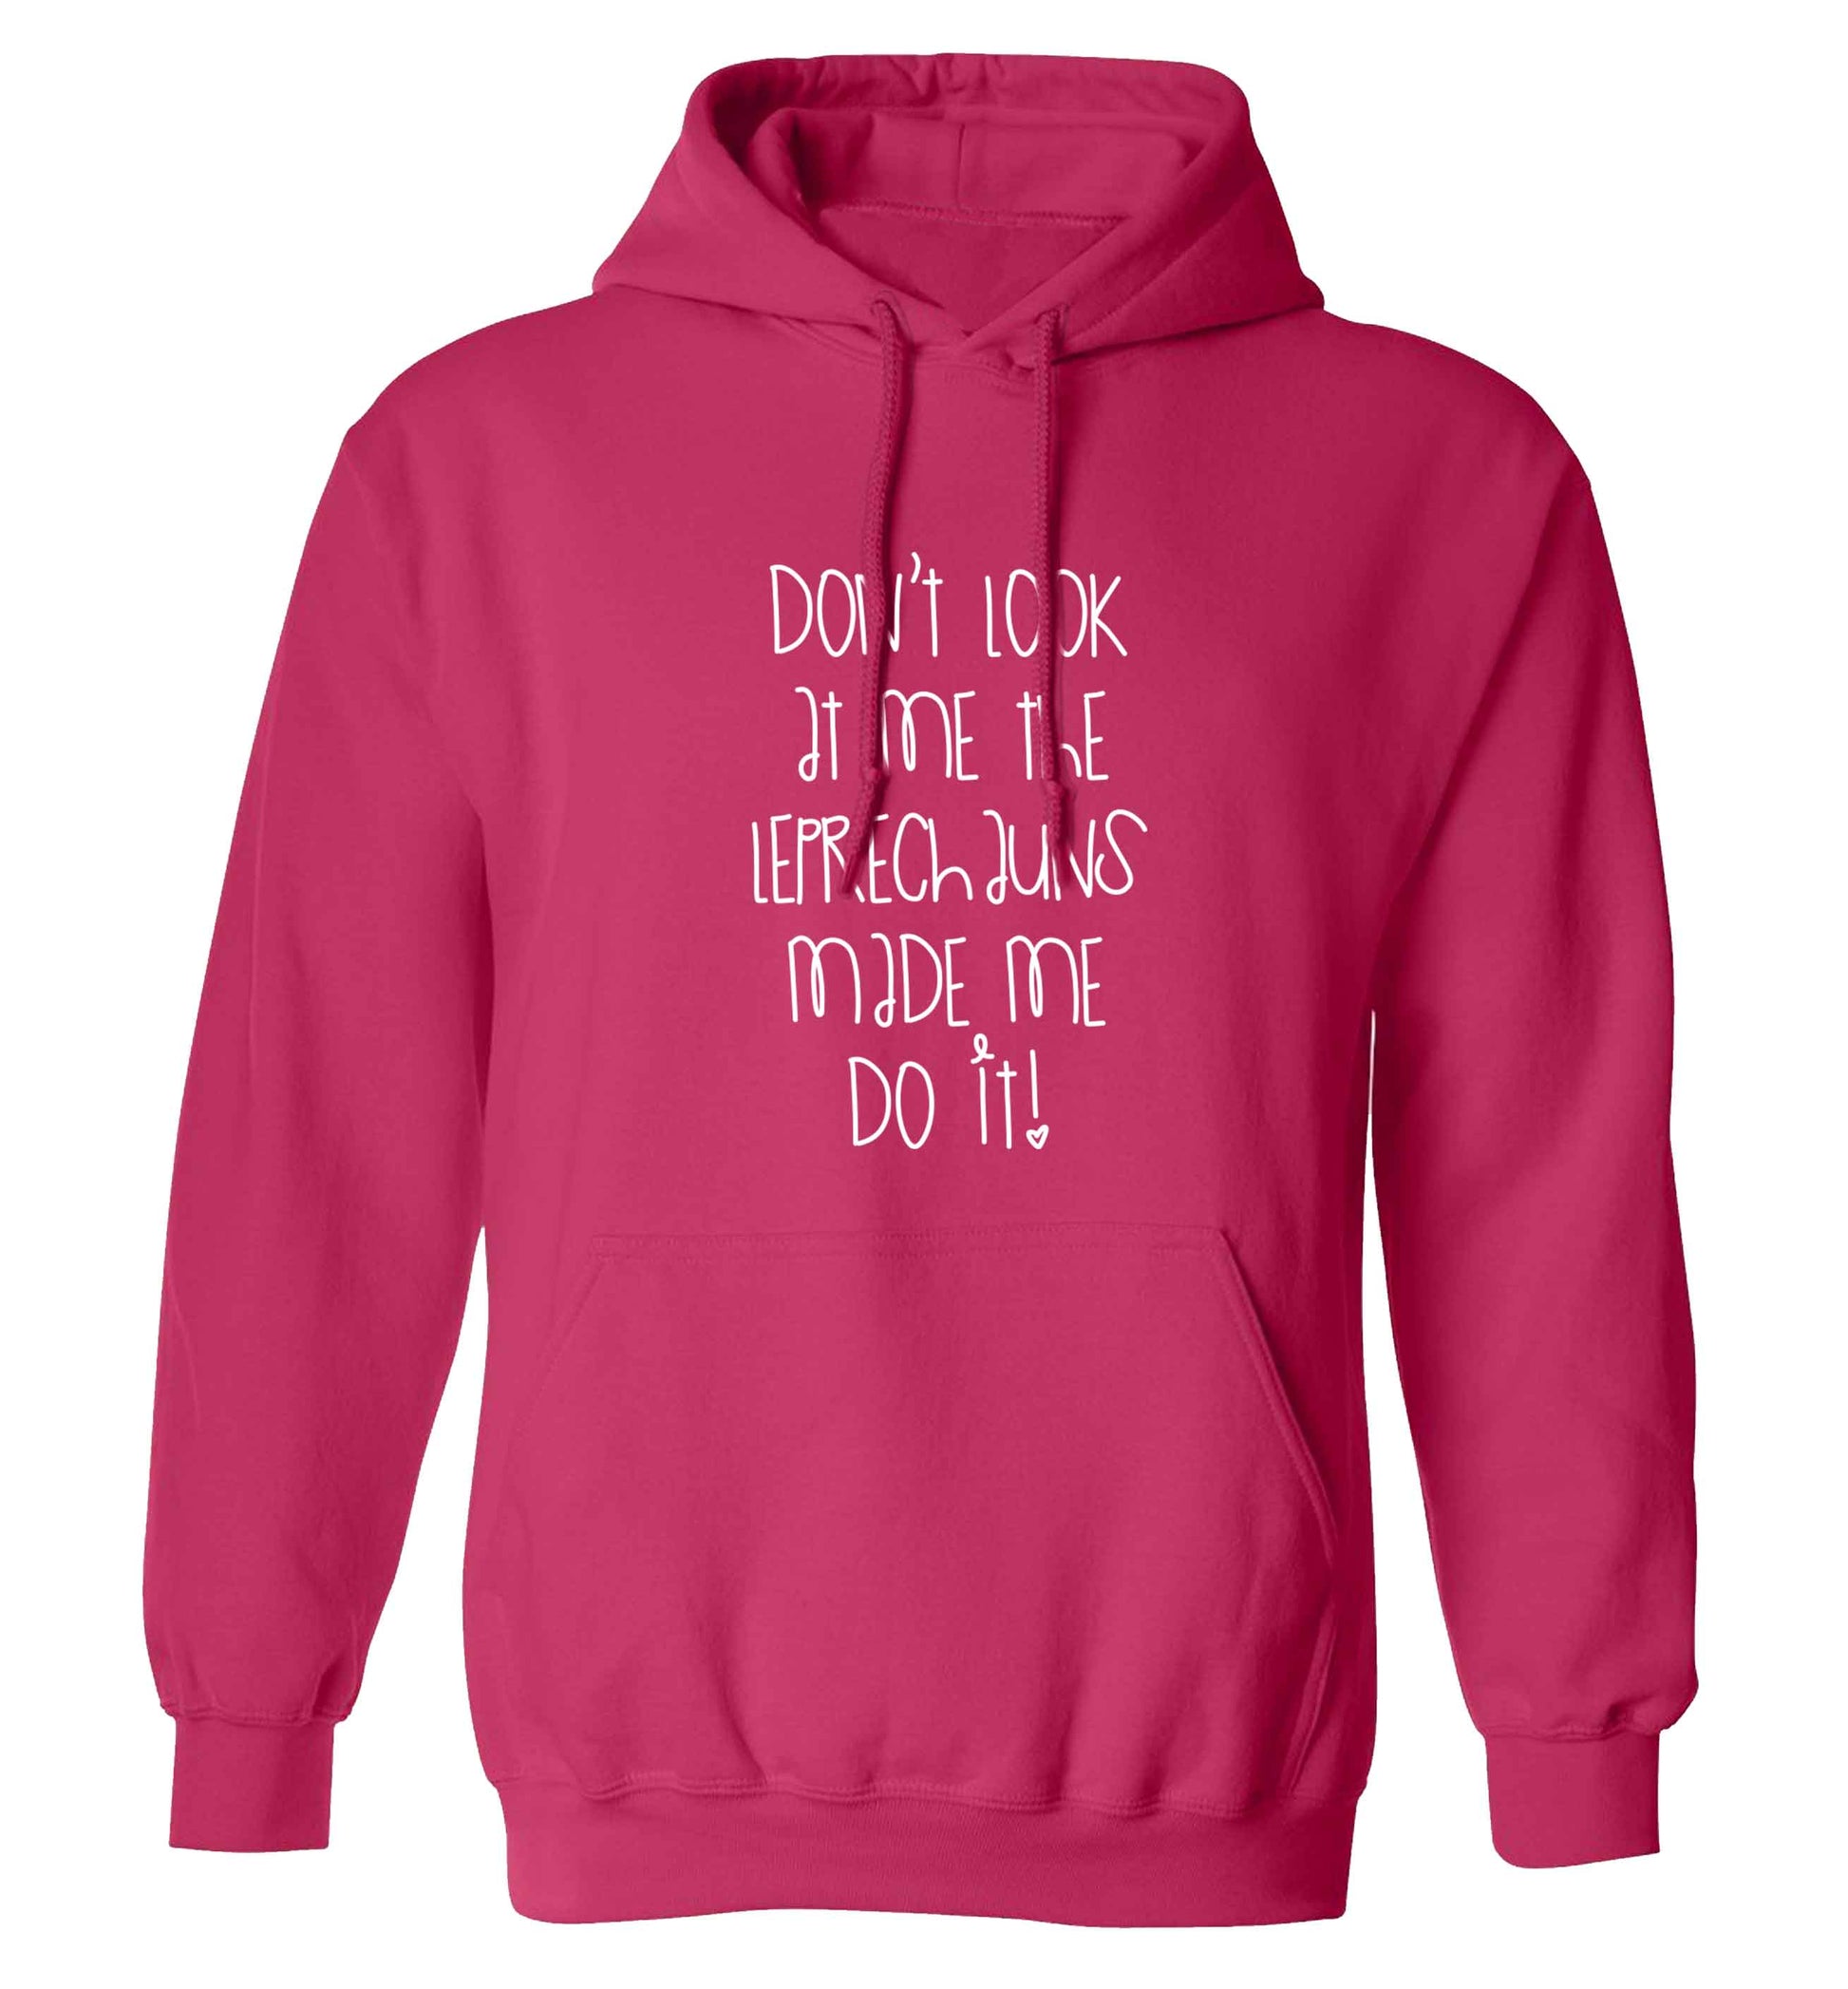 Don't look at me the leprechauns made me do it adults unisex pink hoodie 2XL